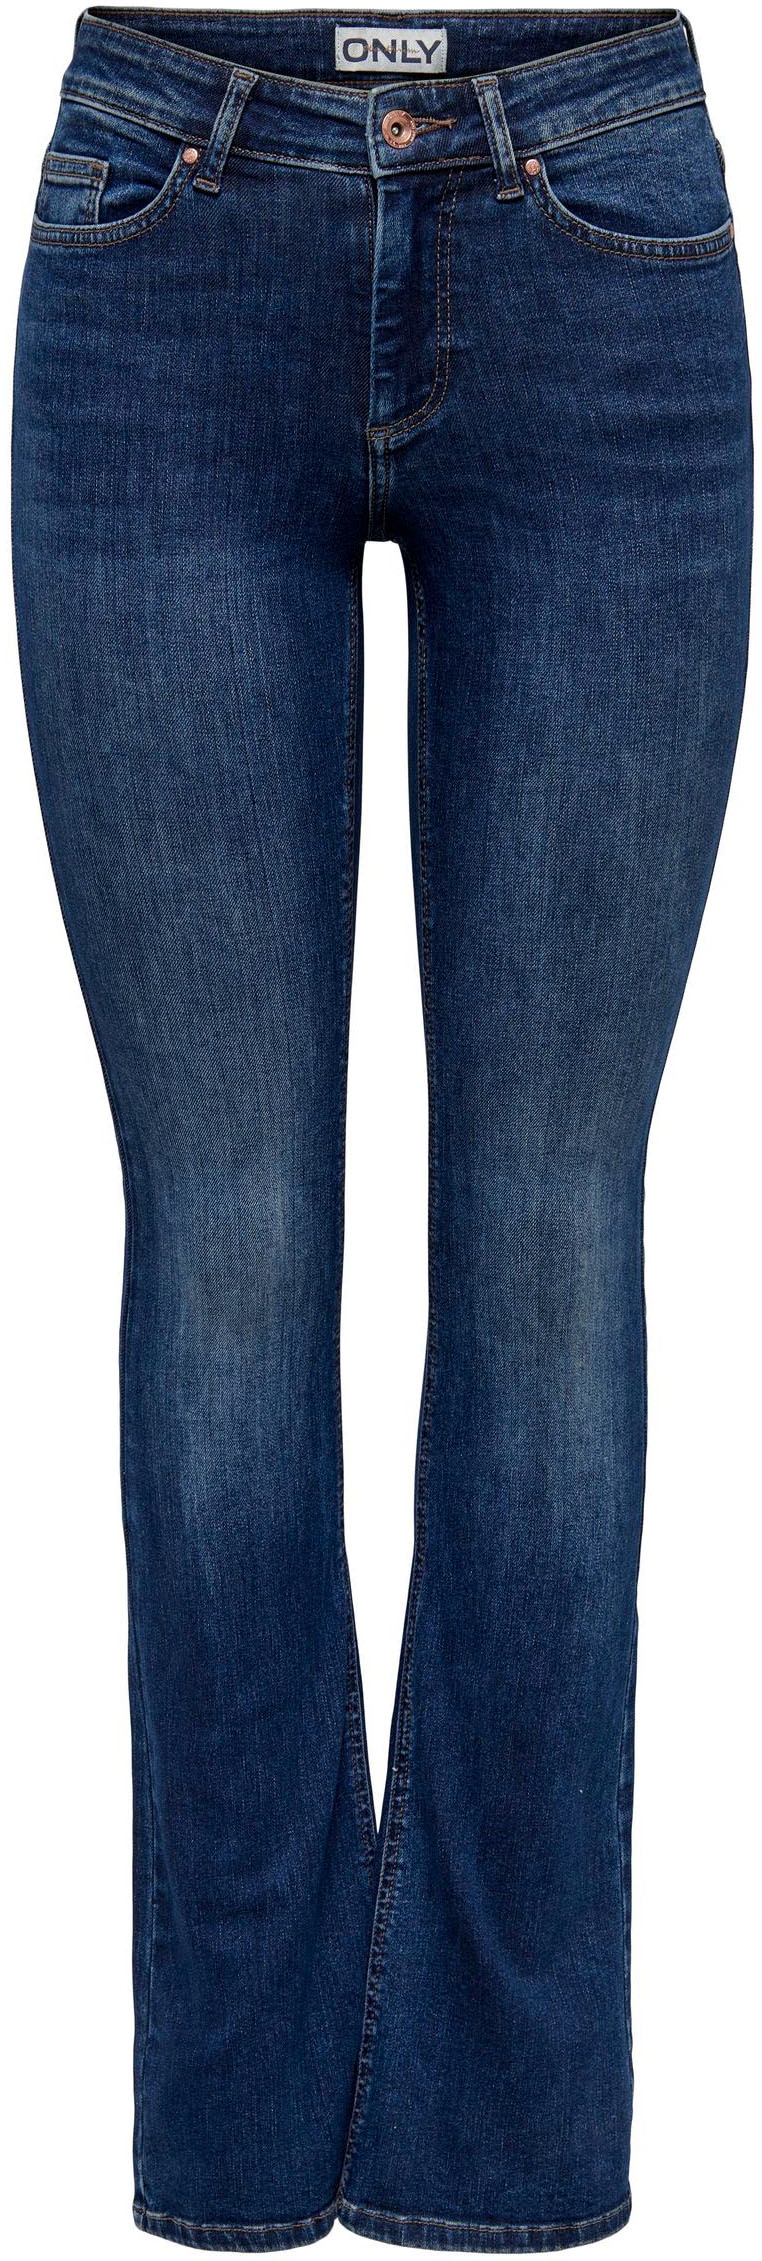 ONLY Bootcut-Jeans MID FLARED bei TAI021« ♕ »ONLBLUSH DNM